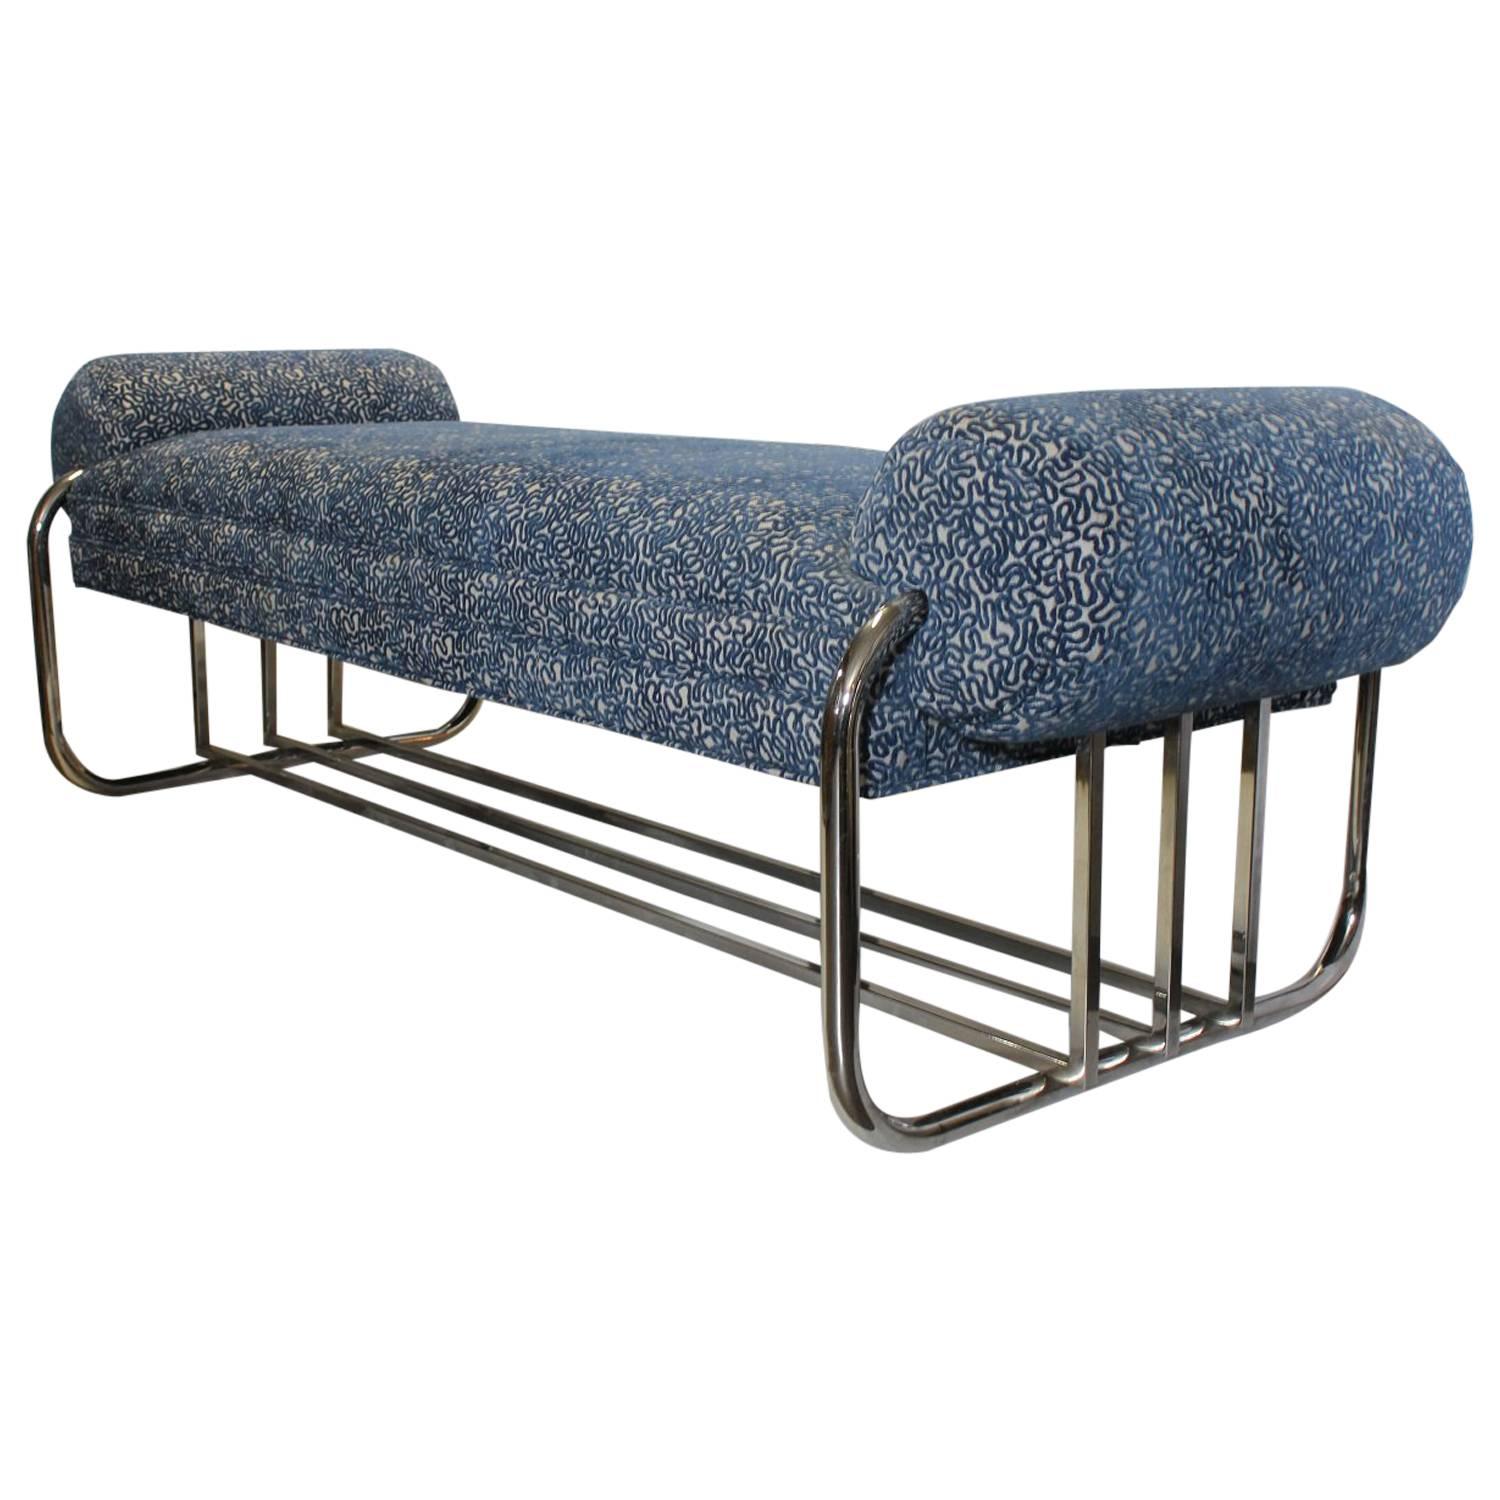 Large Midcentury Chrome Bench/Daybed For Sale